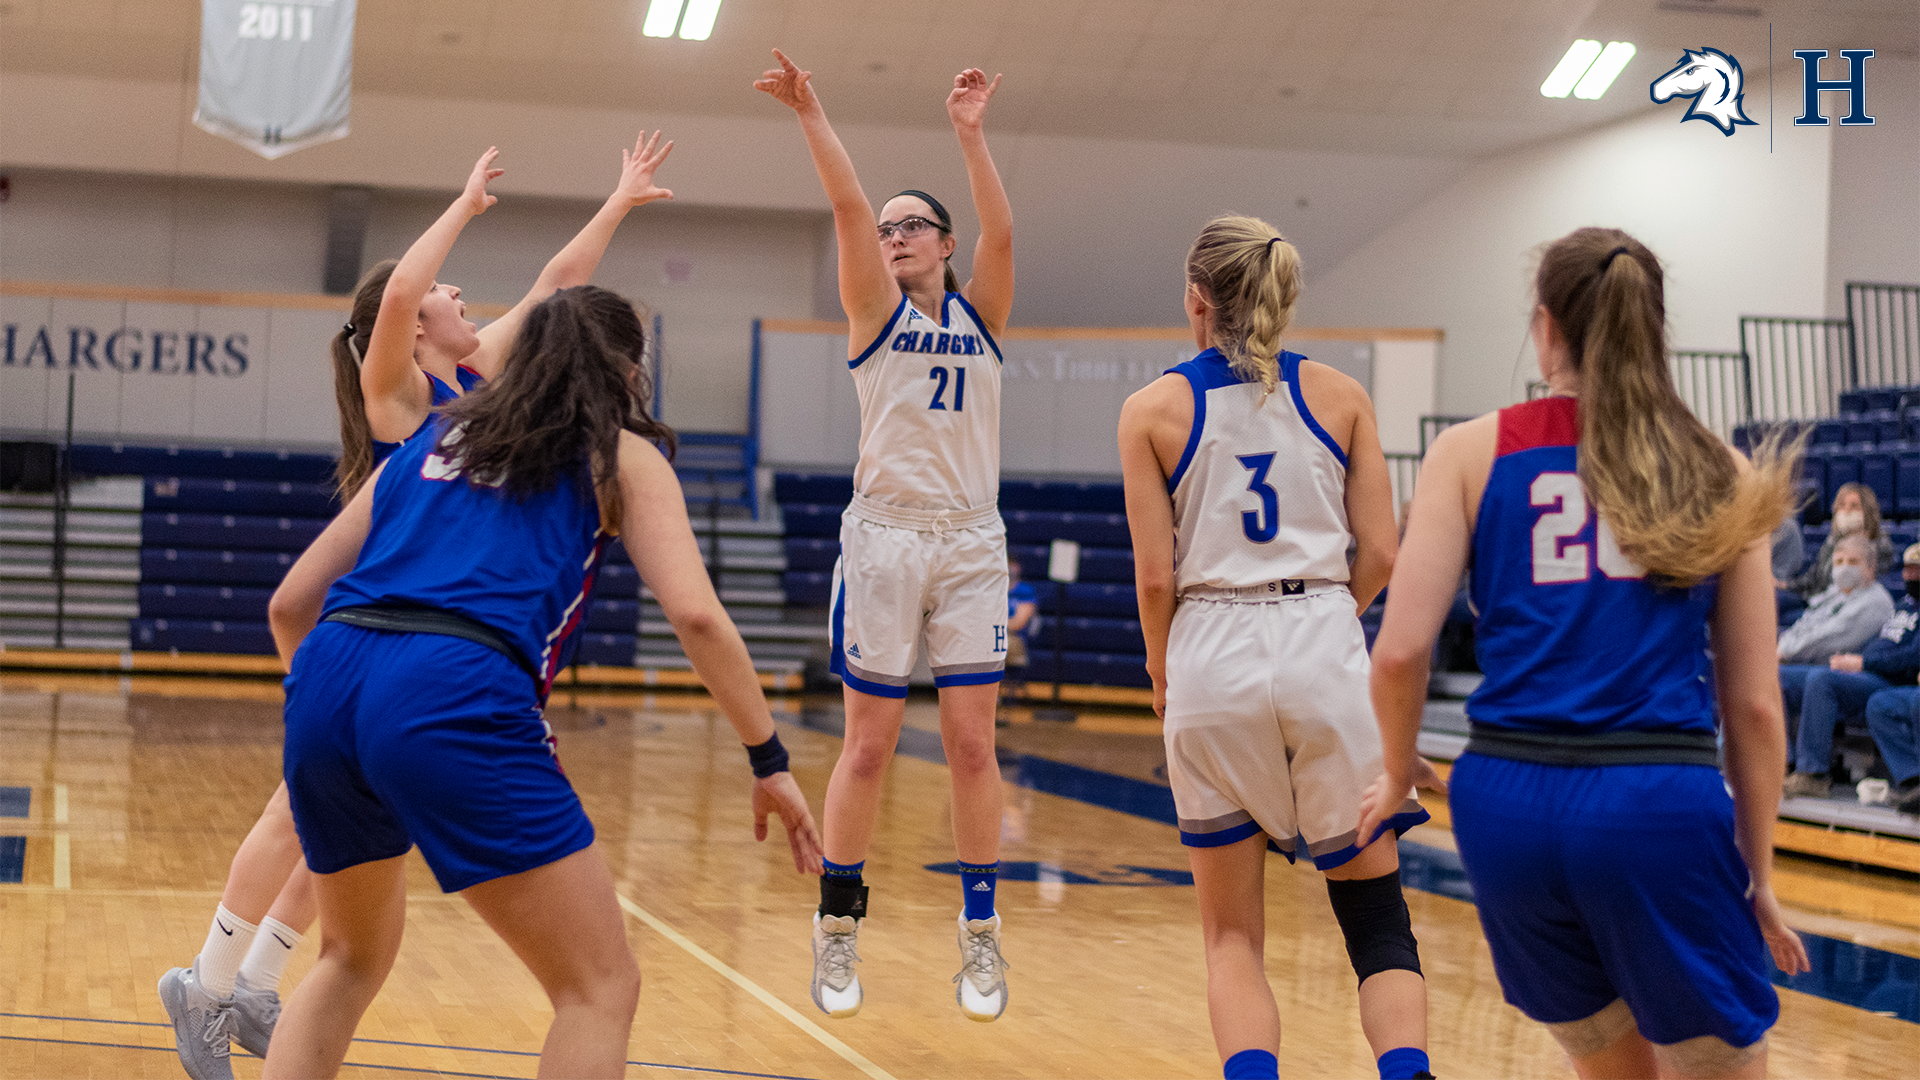 Charger women roll past Ohio Valley, 109-62, for second straight win